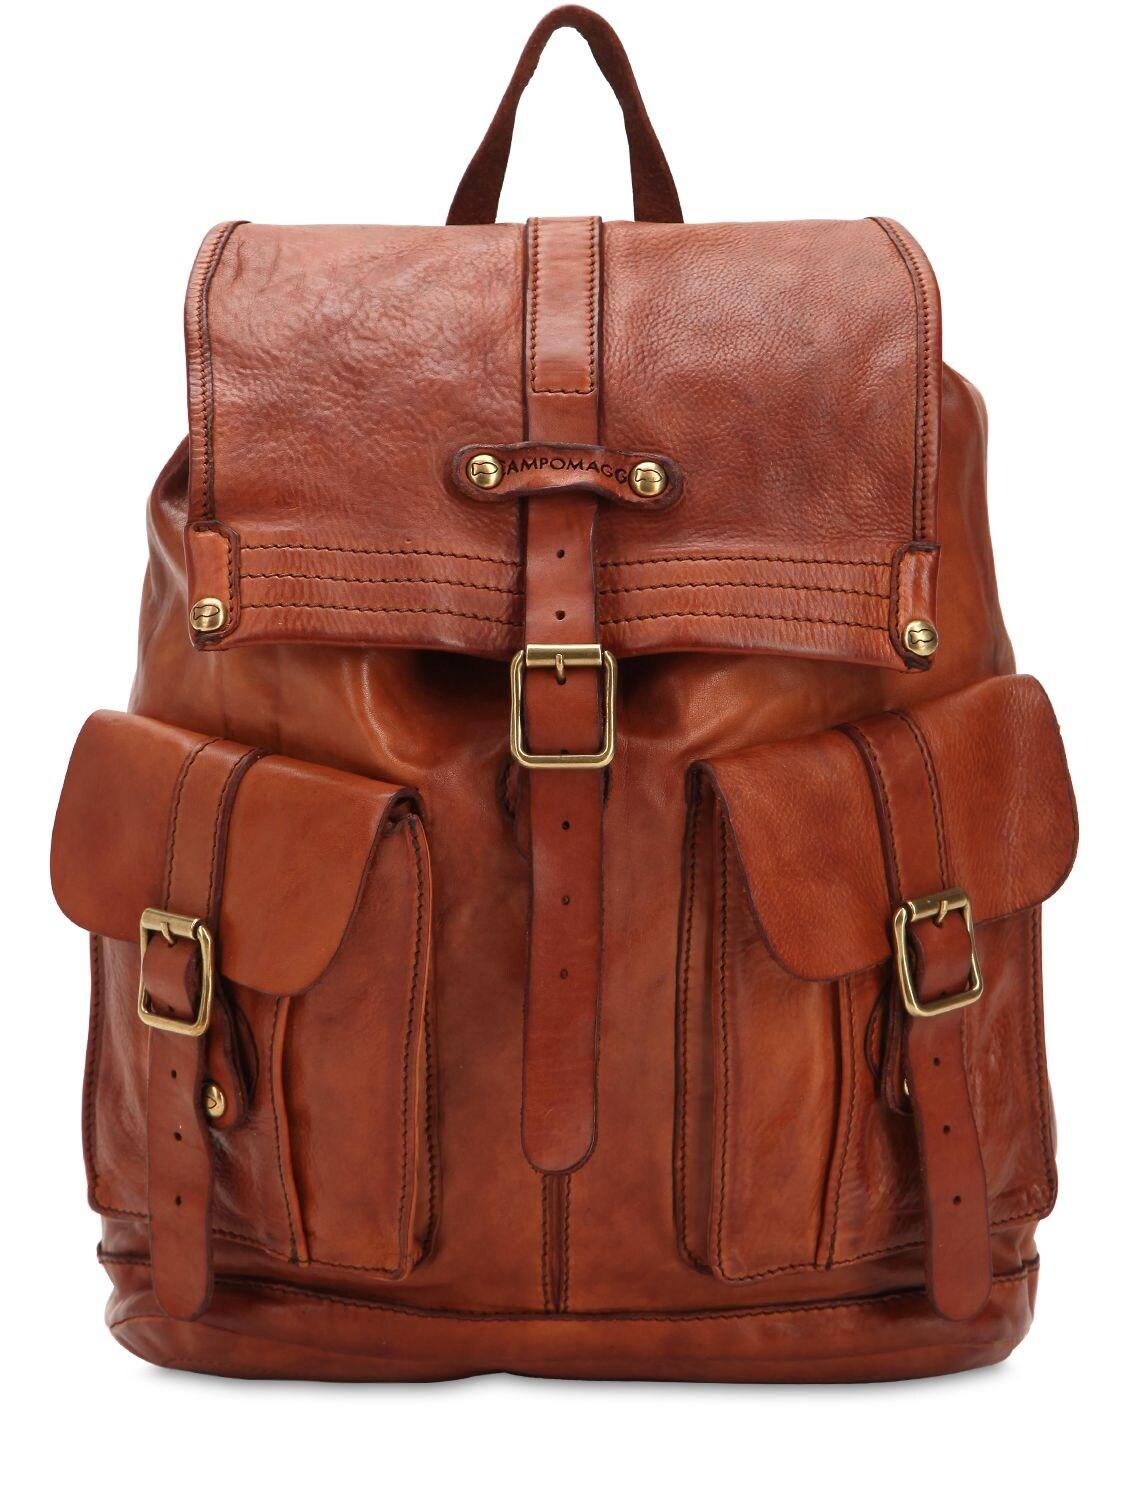 Campomaggi Studded Leather Backpack in Brown for Men | Lyst